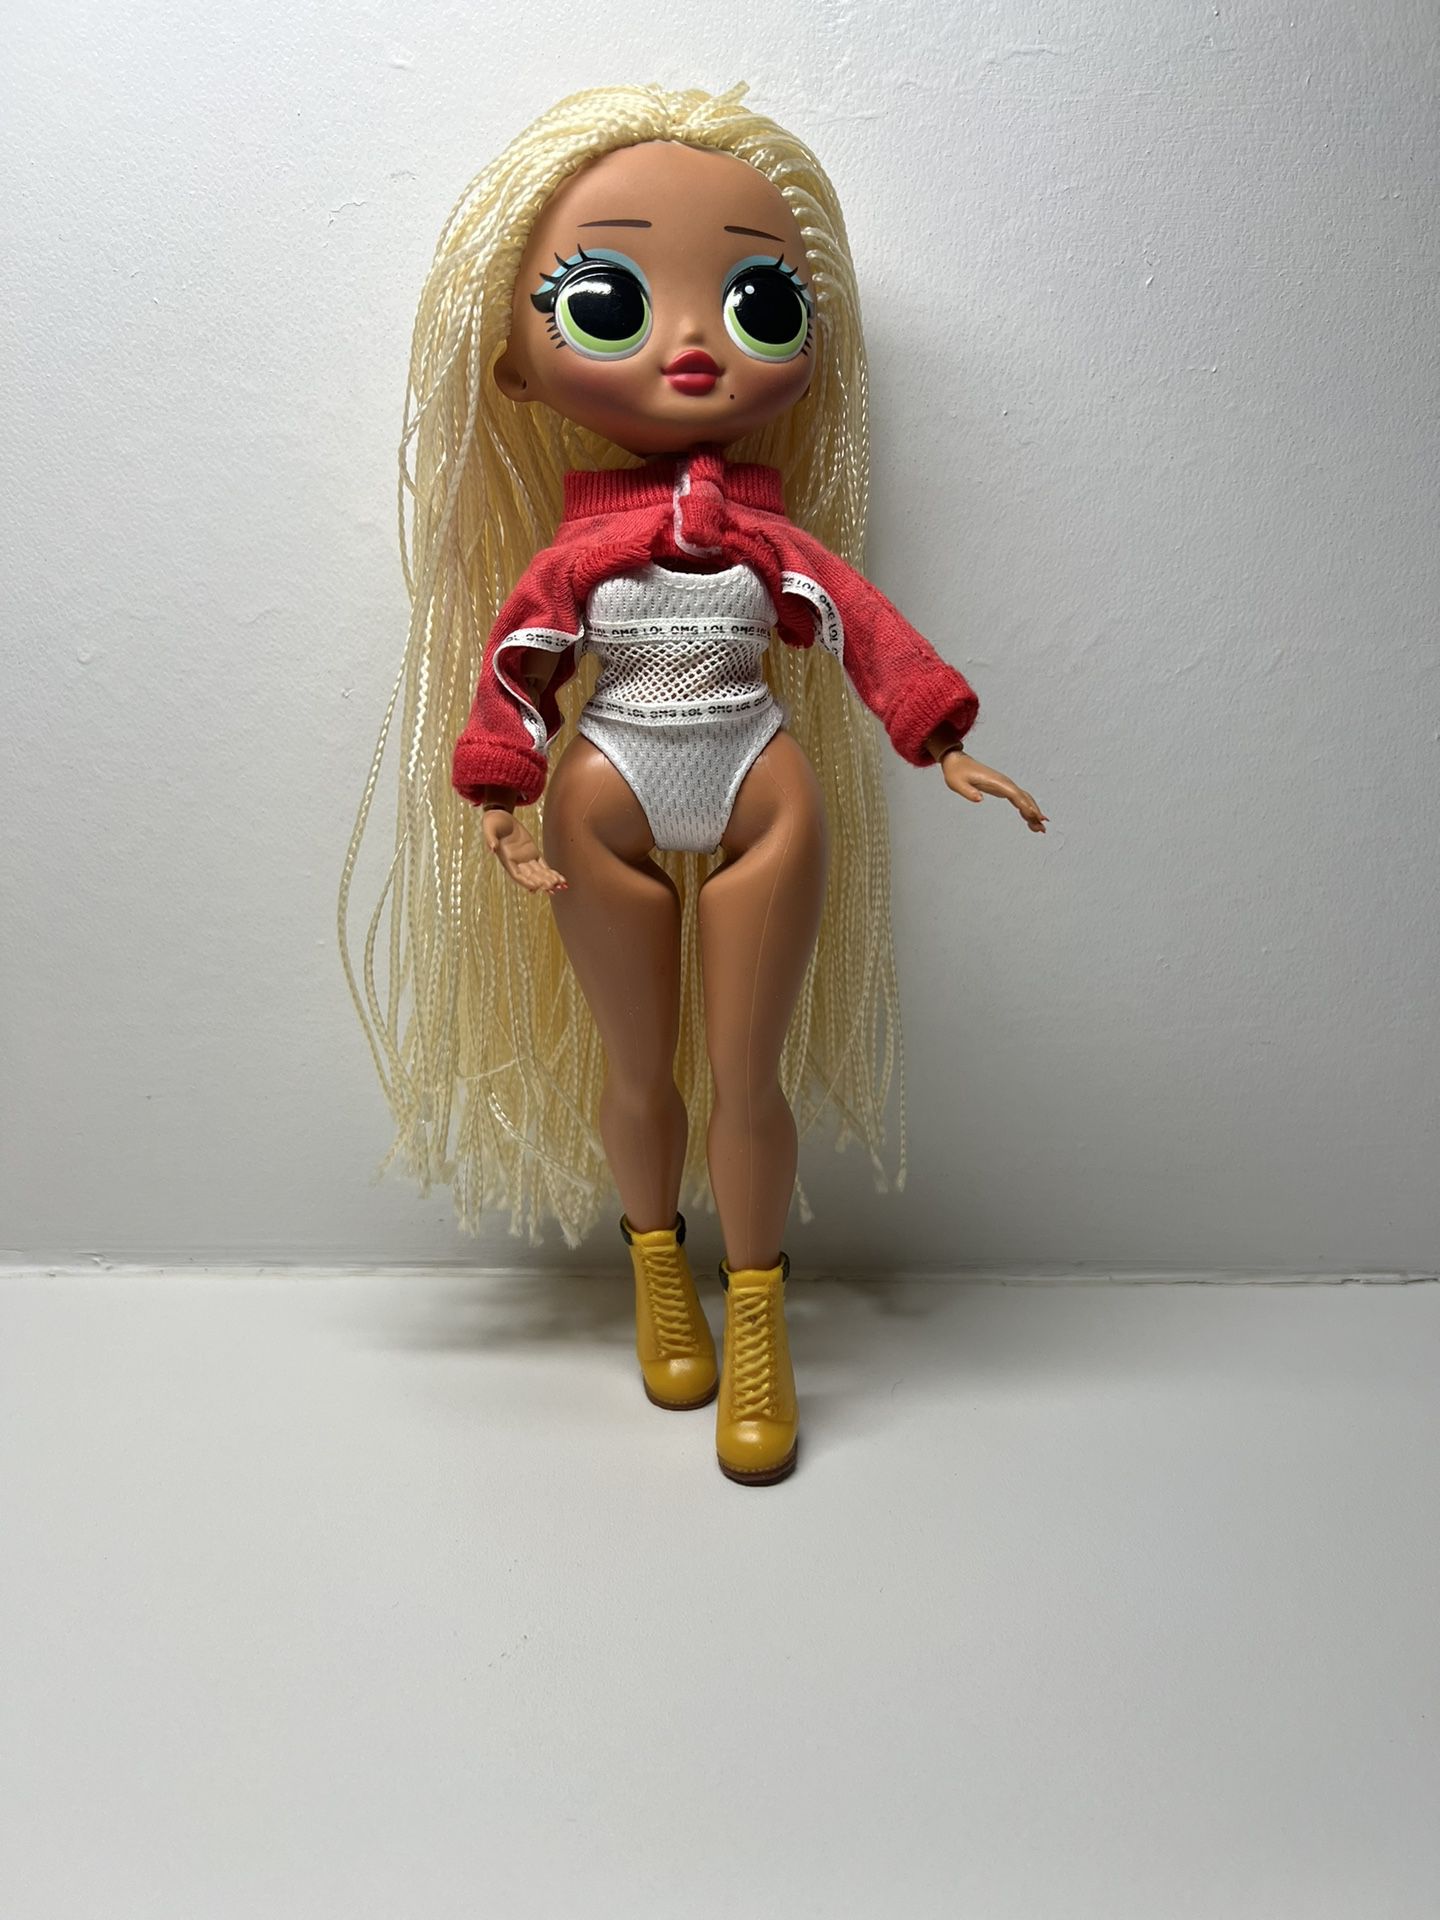 LOL Surprise OMG Series 1 Swag 9" Fashion Doll No Accessories